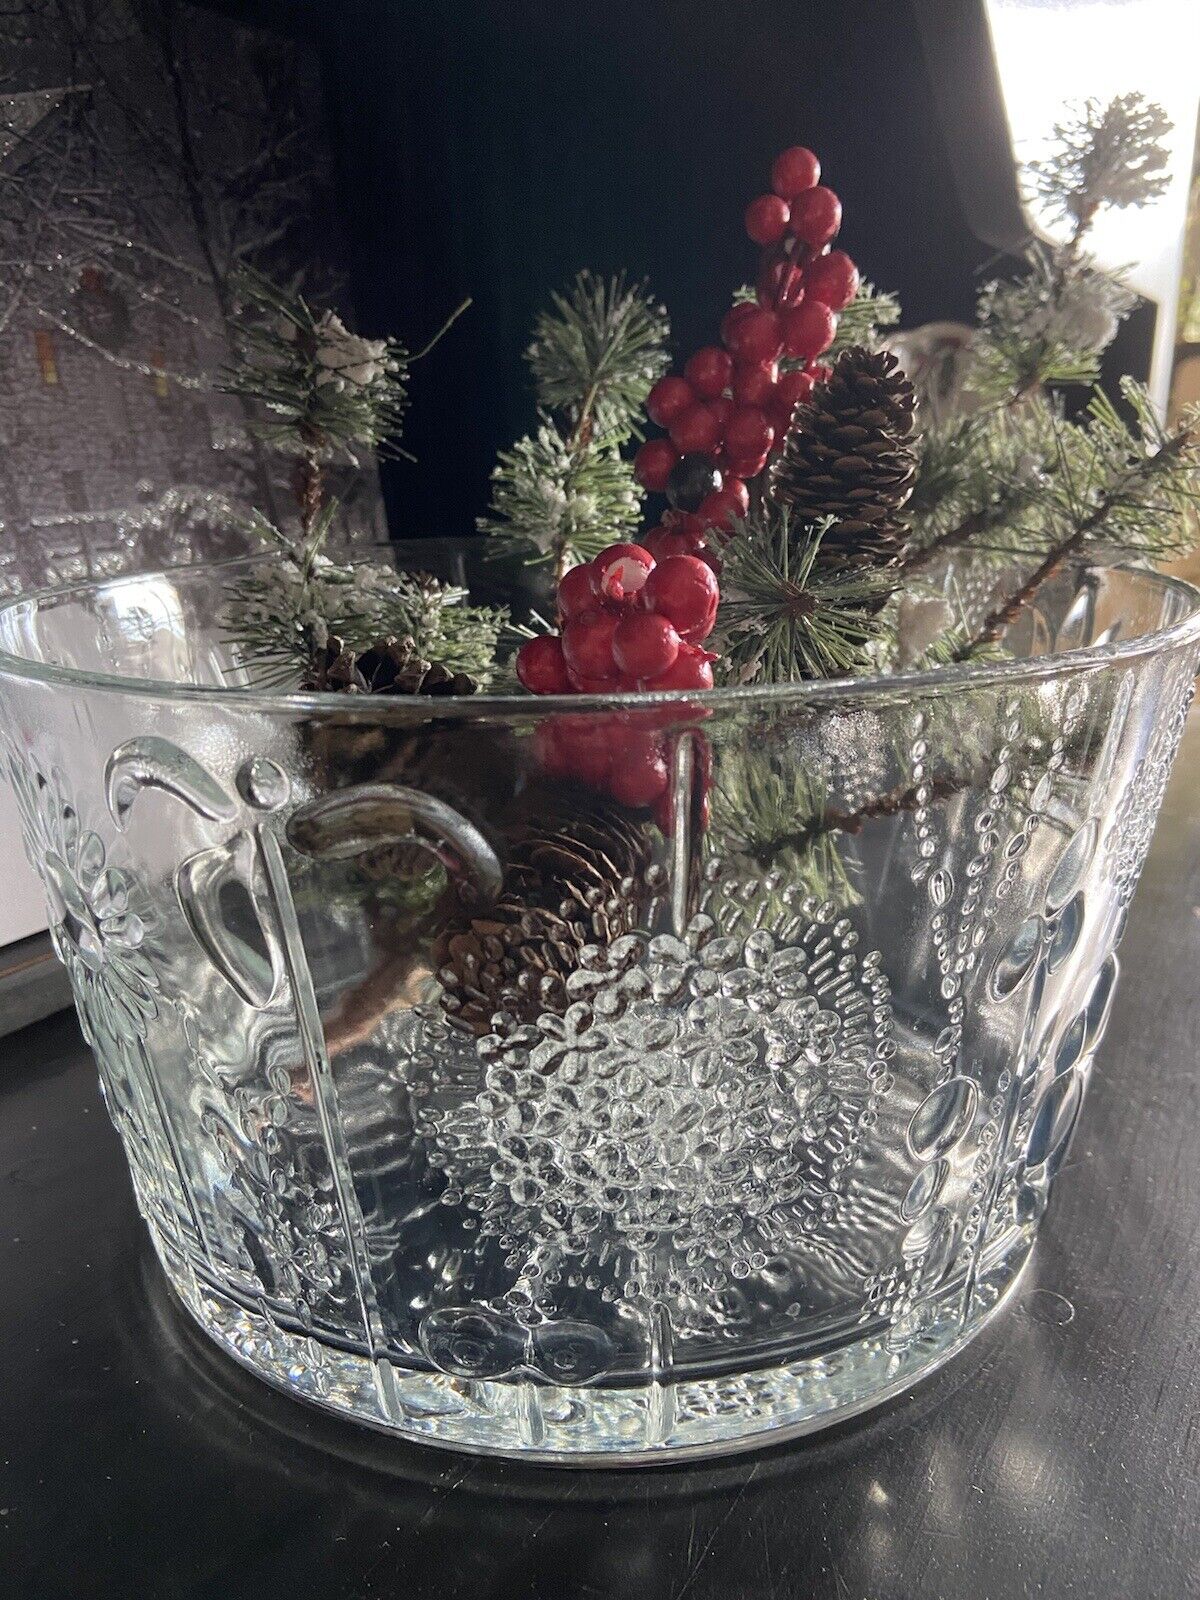 NUUTAJARVI Flora Glass Fruit Bowl by Oiva Toikka for Iittala Finland 9.75x5.75in